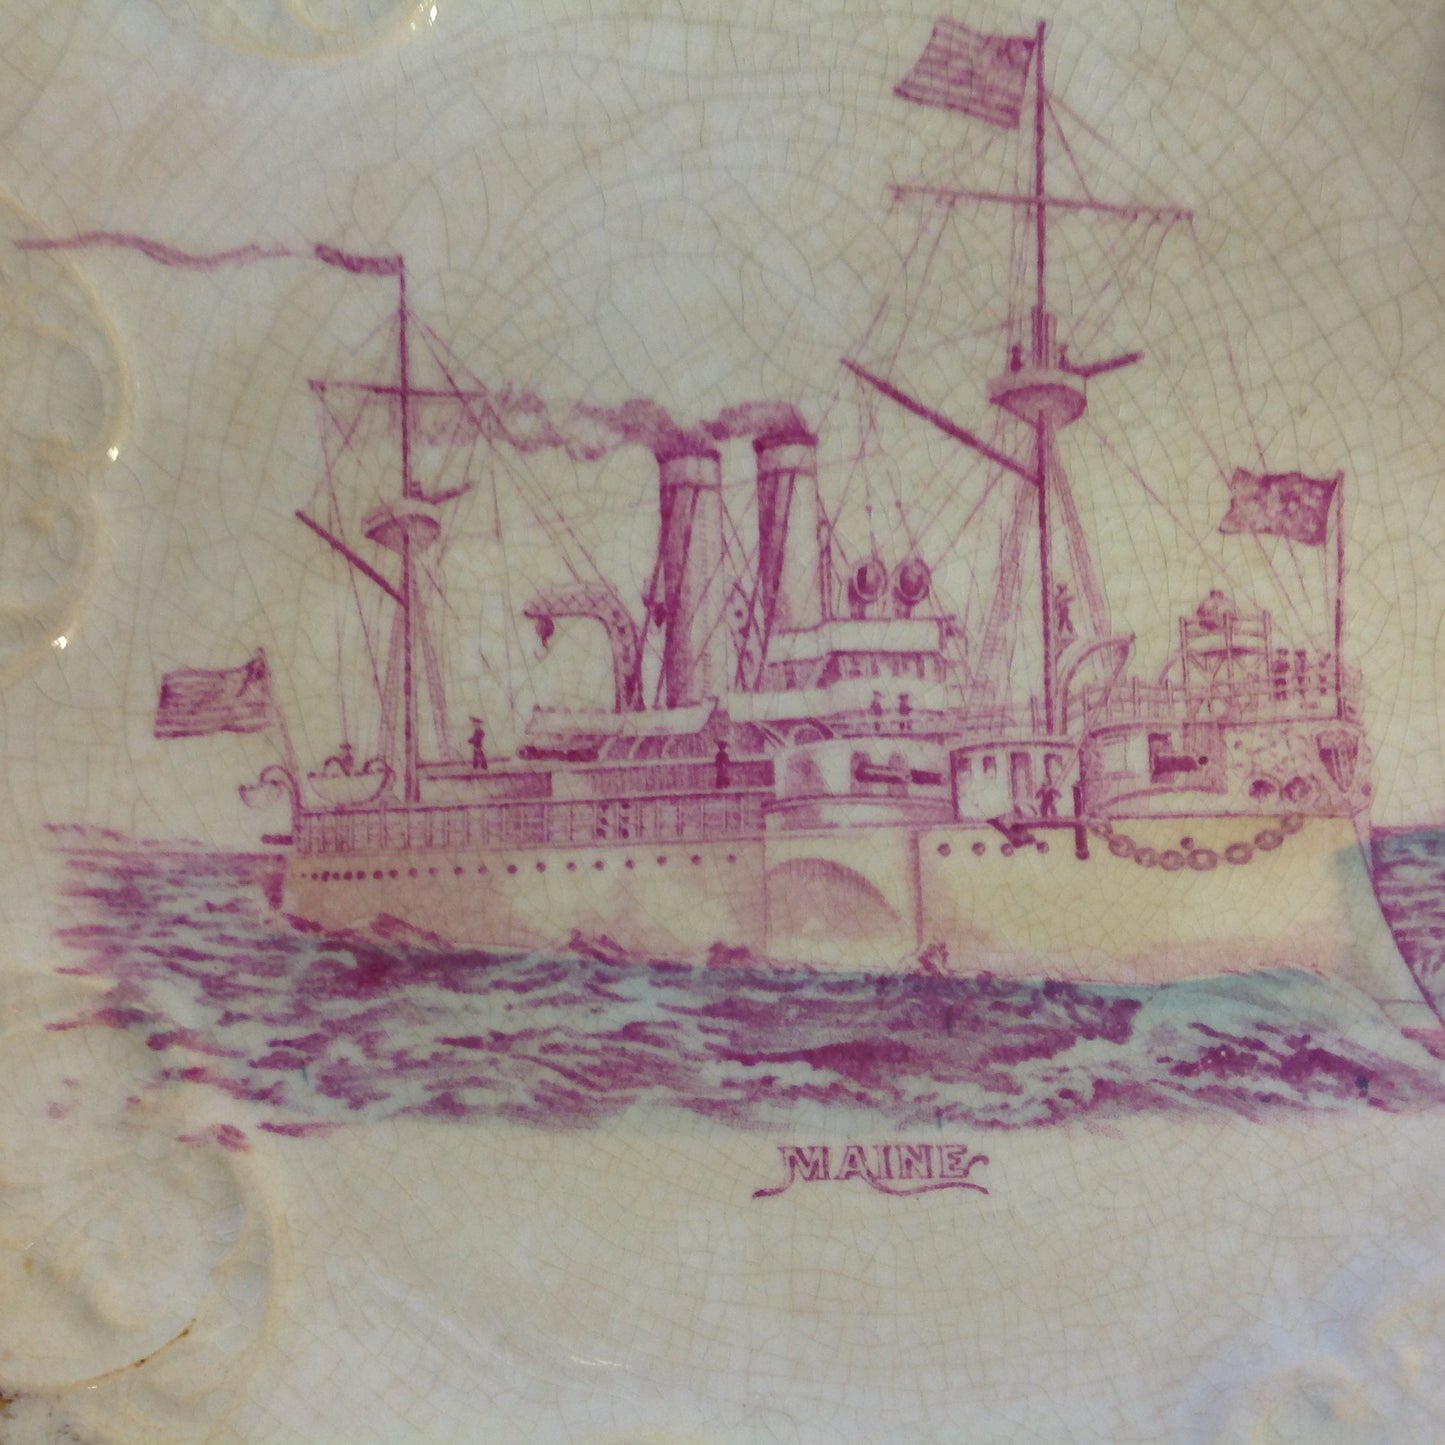 Vintage Spanish-American War Era Limoges Porcelain Collectors' Plate with USS Maine